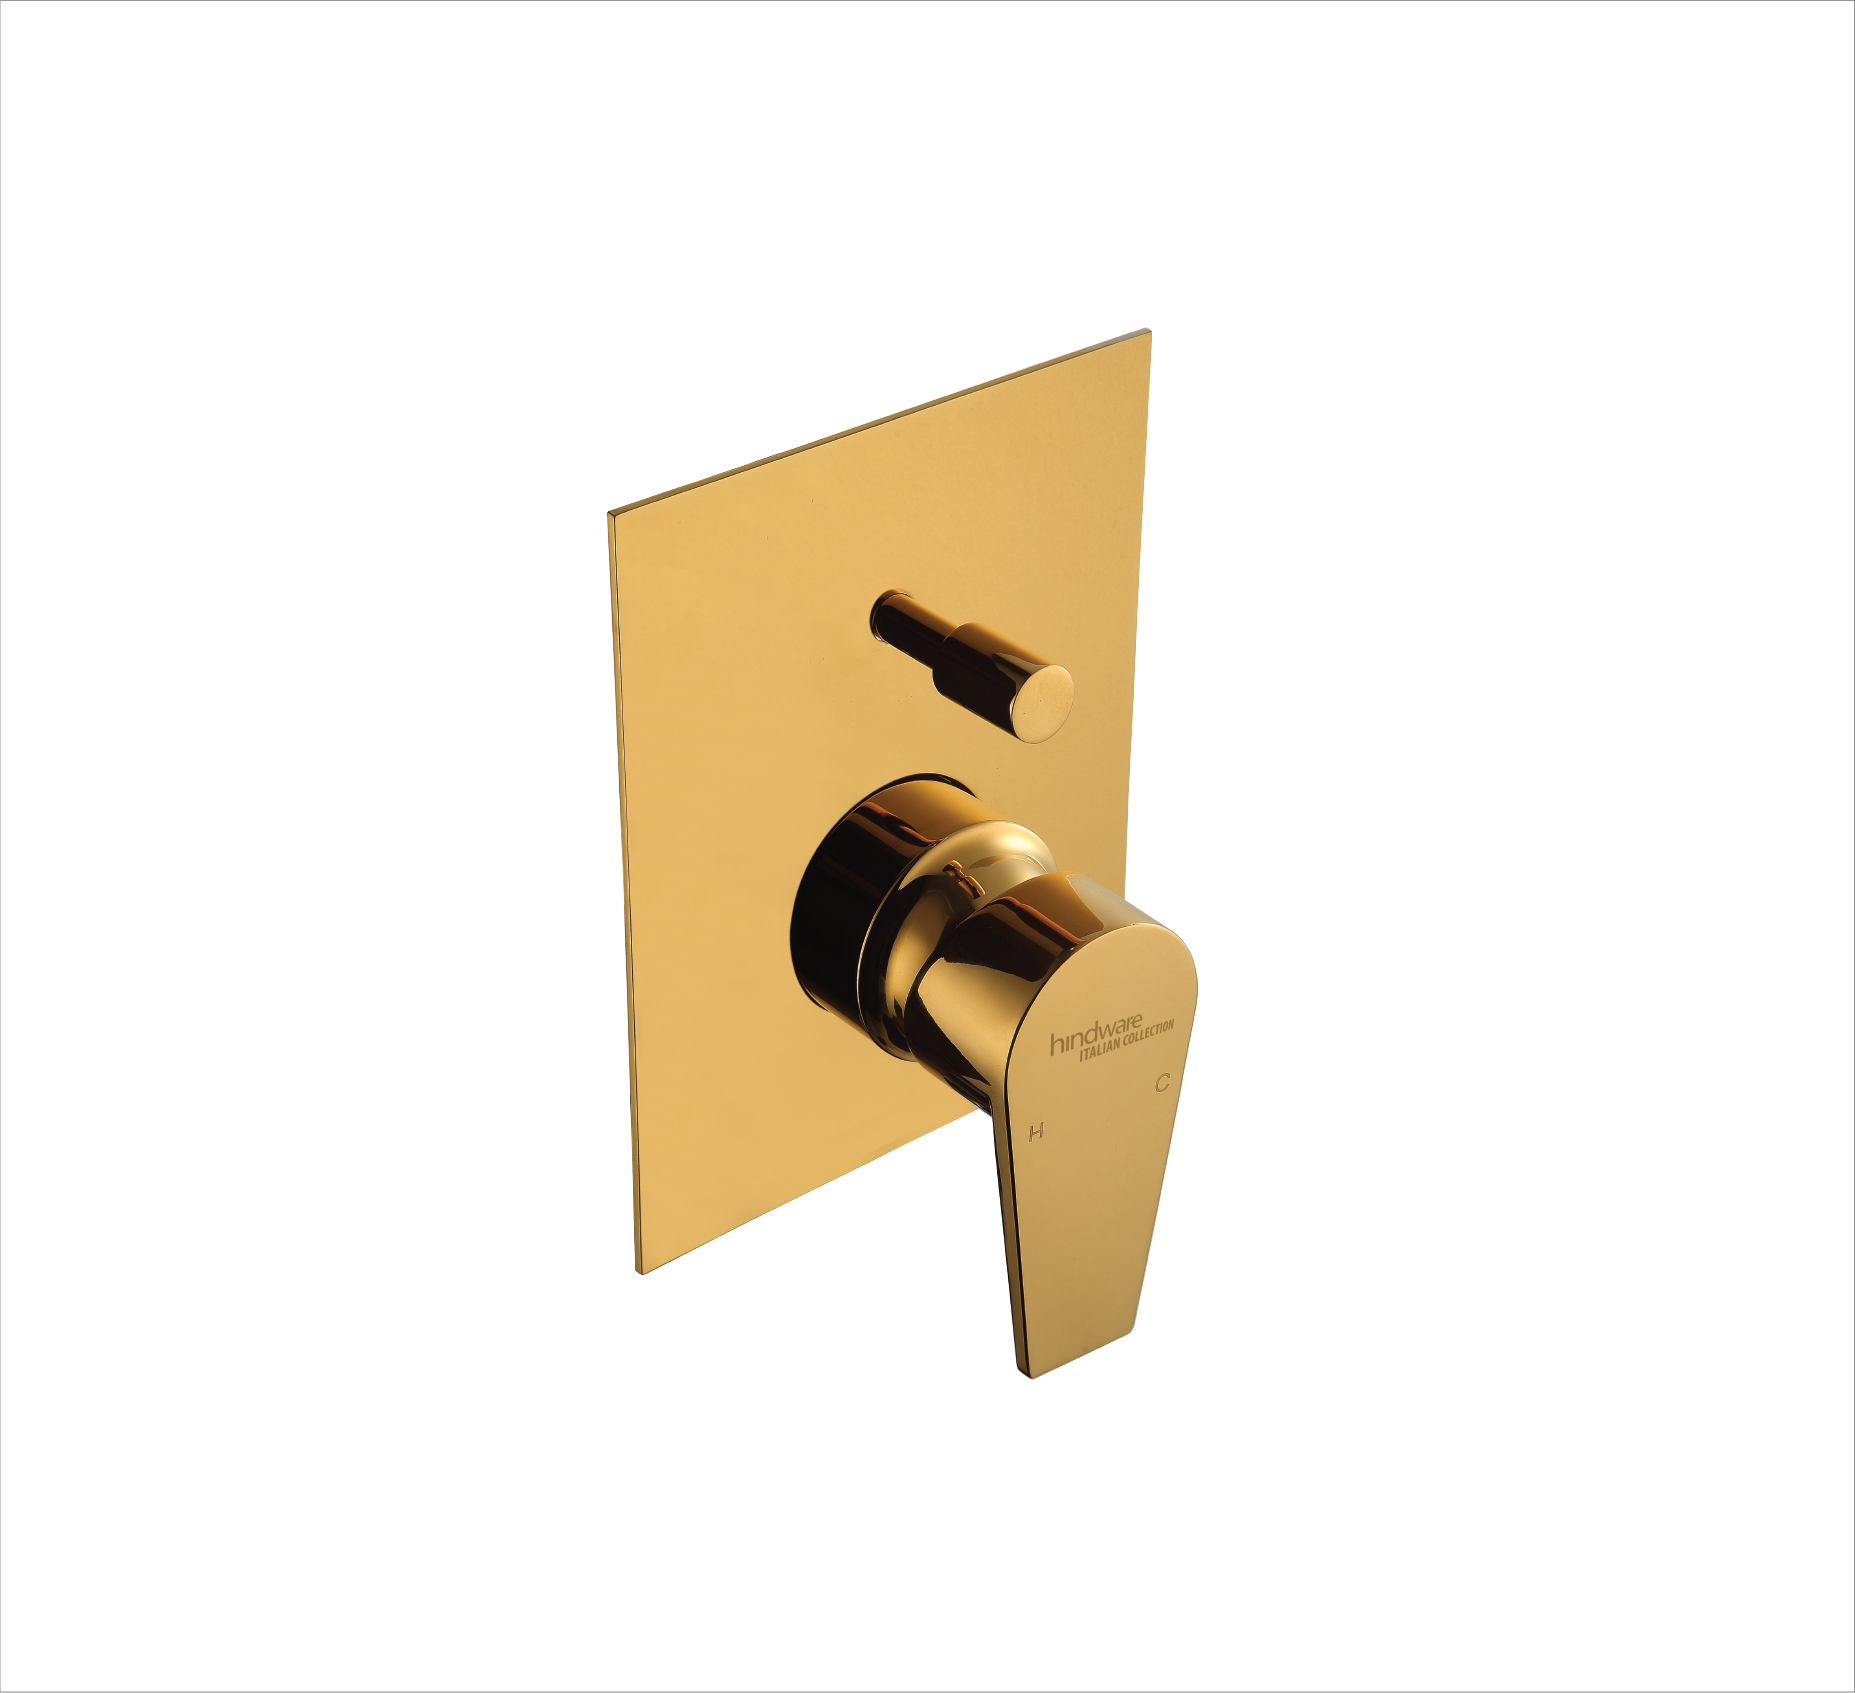 SINGLE LEVER EXPOSED PART KIT OF HI – FLOW DIVERTOR CONSISTING OF OPERATING LEVER WALL FLANGE & KNOB ONLY IN GOLD